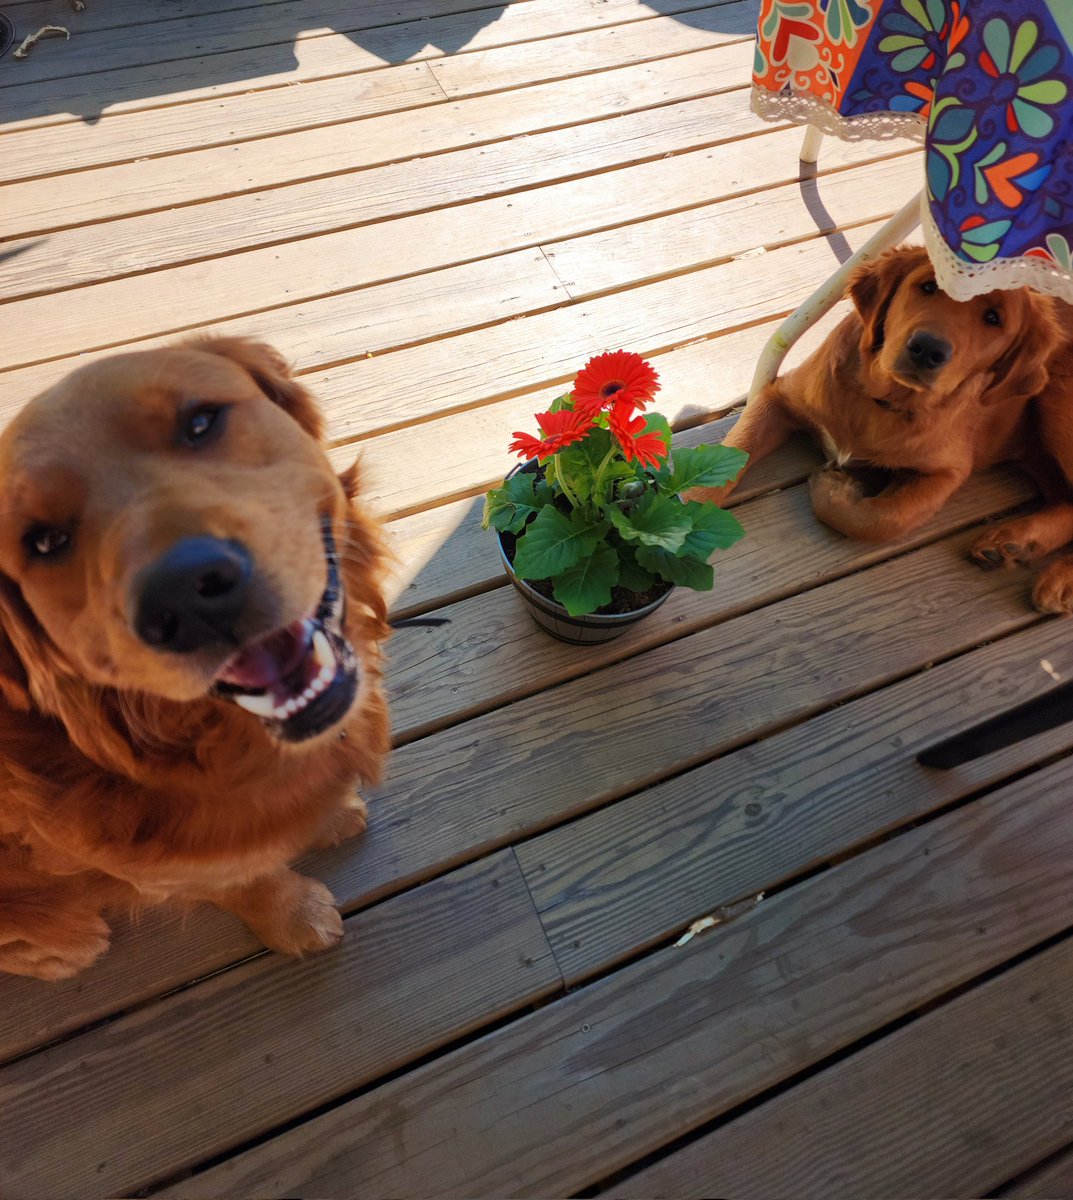 Happy Mother's Day to all the moms out there!! A special shout out to our mom, without her, we would be missing out on hundreds of socks. 🤣🤣 #dogsoftwitter #goldenretriever